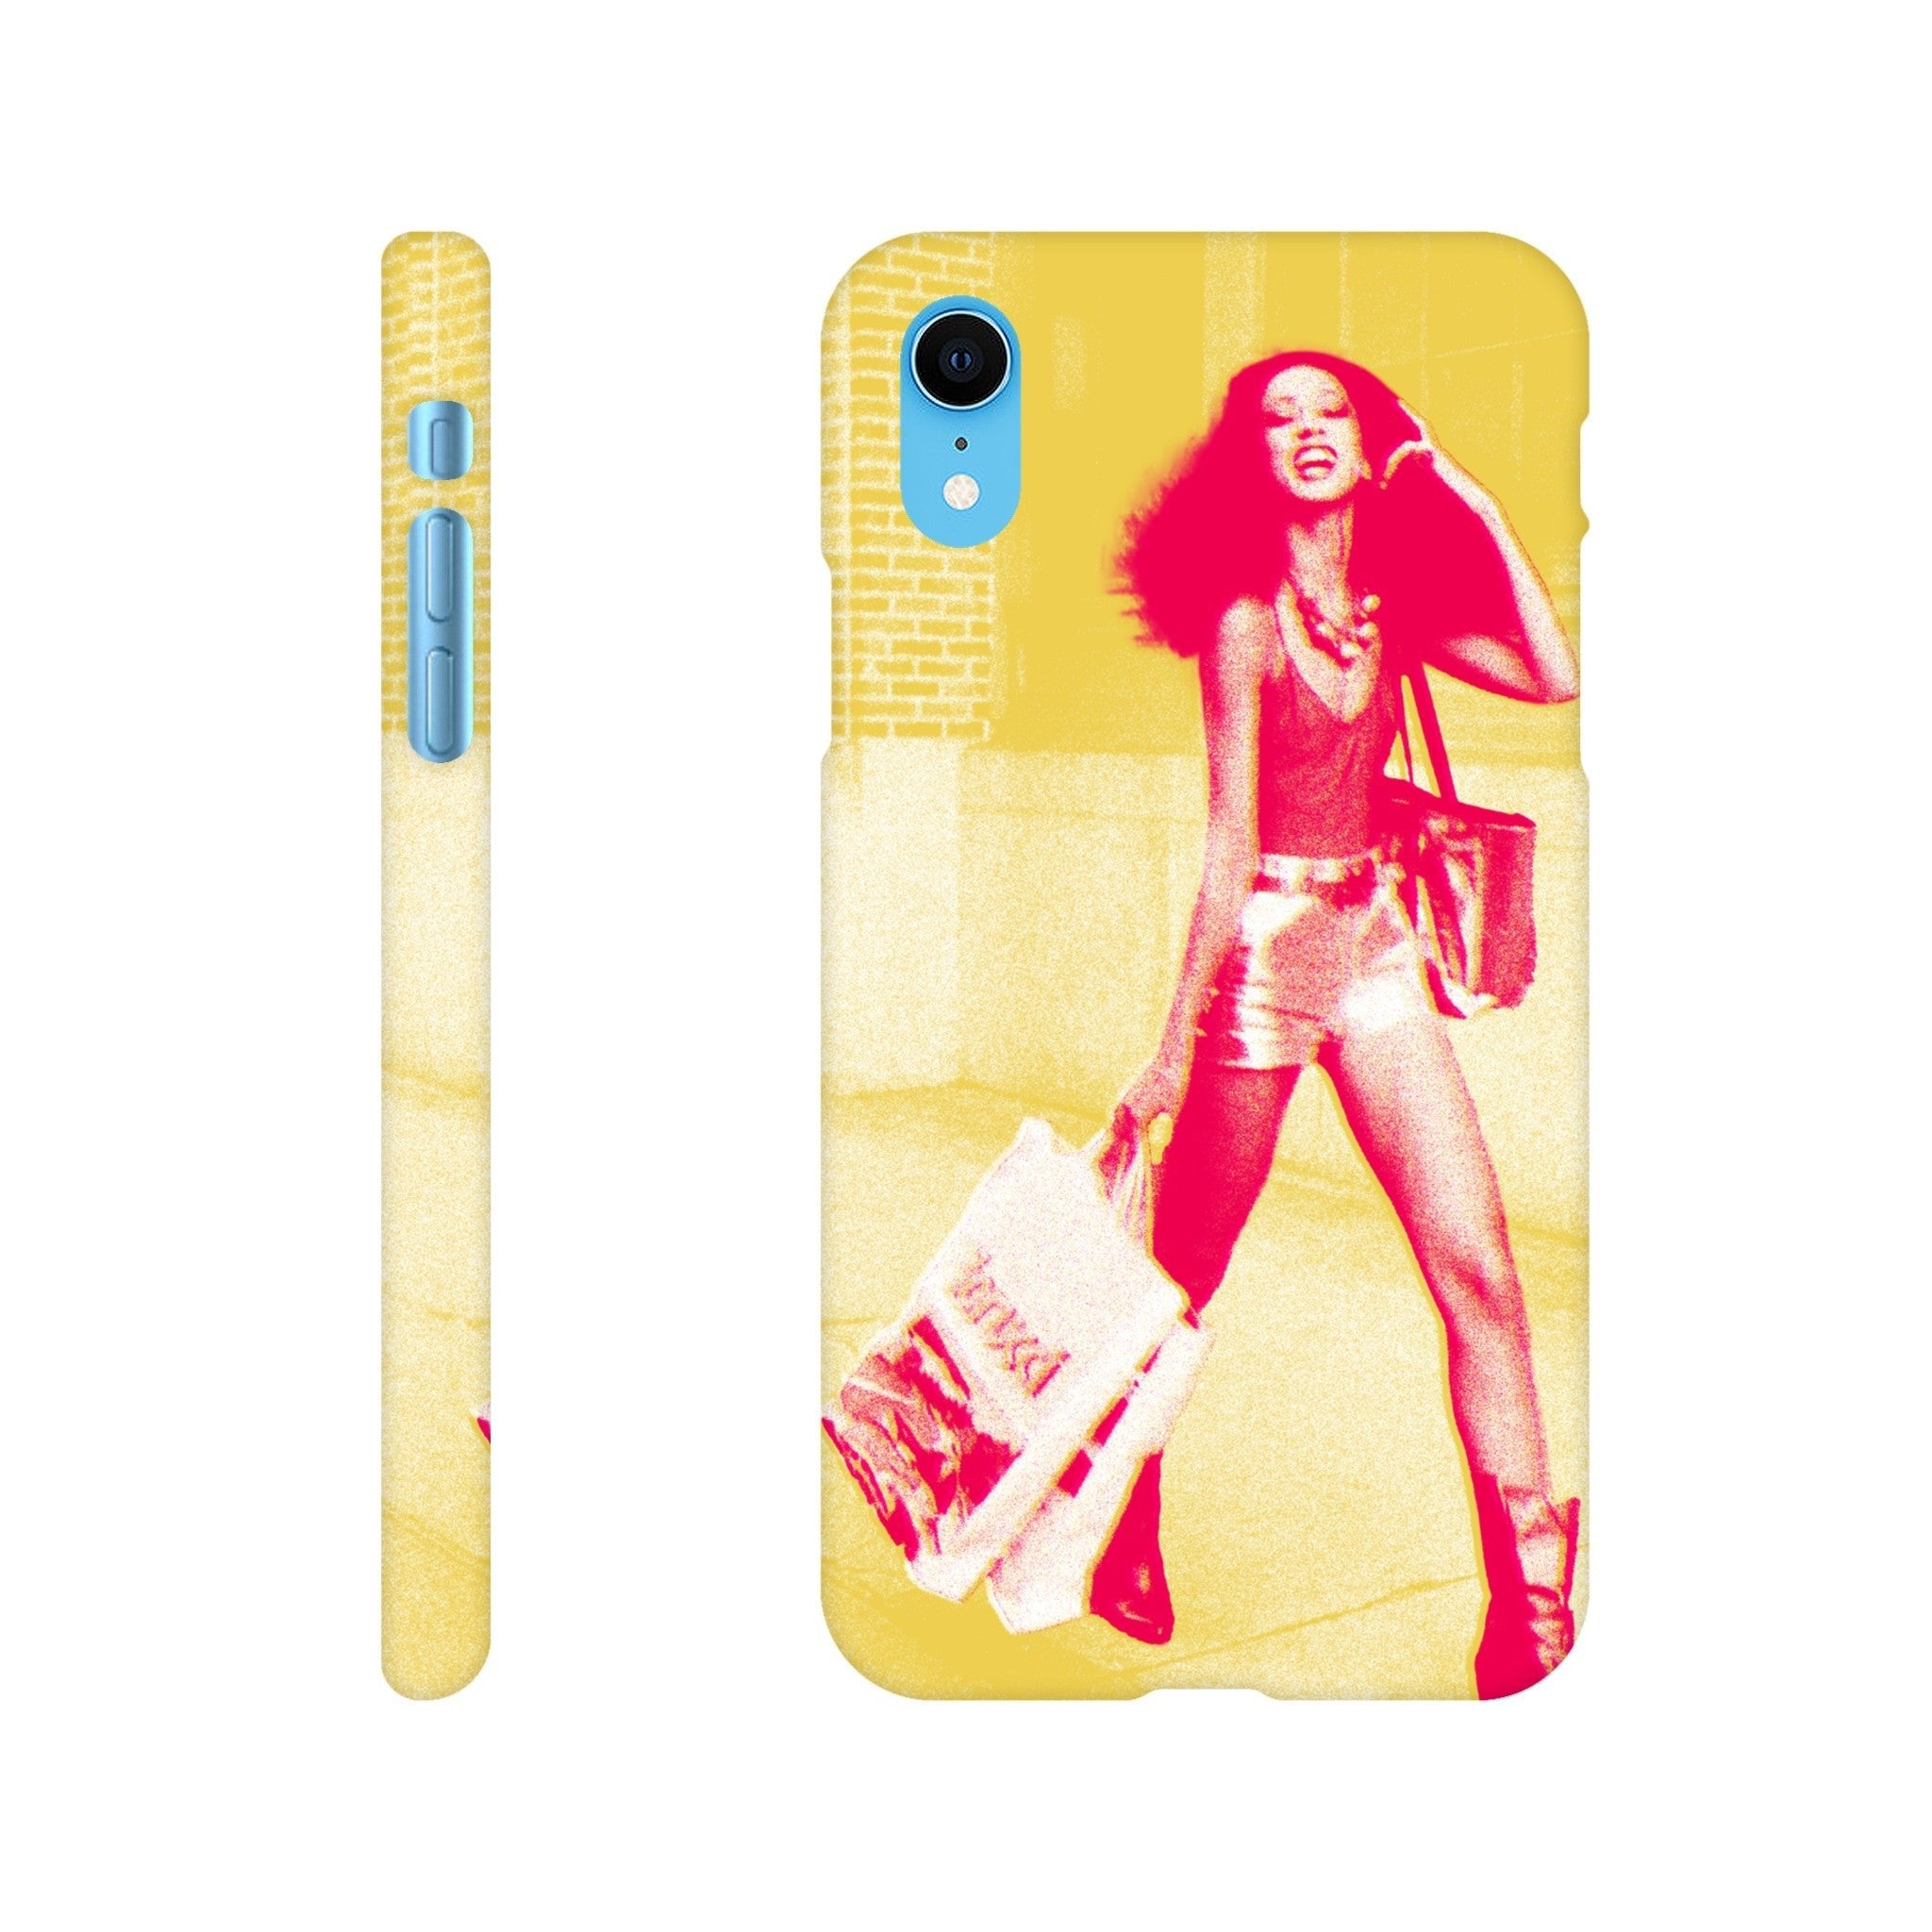 'Retail Therapy' phone case - In Print We Trust